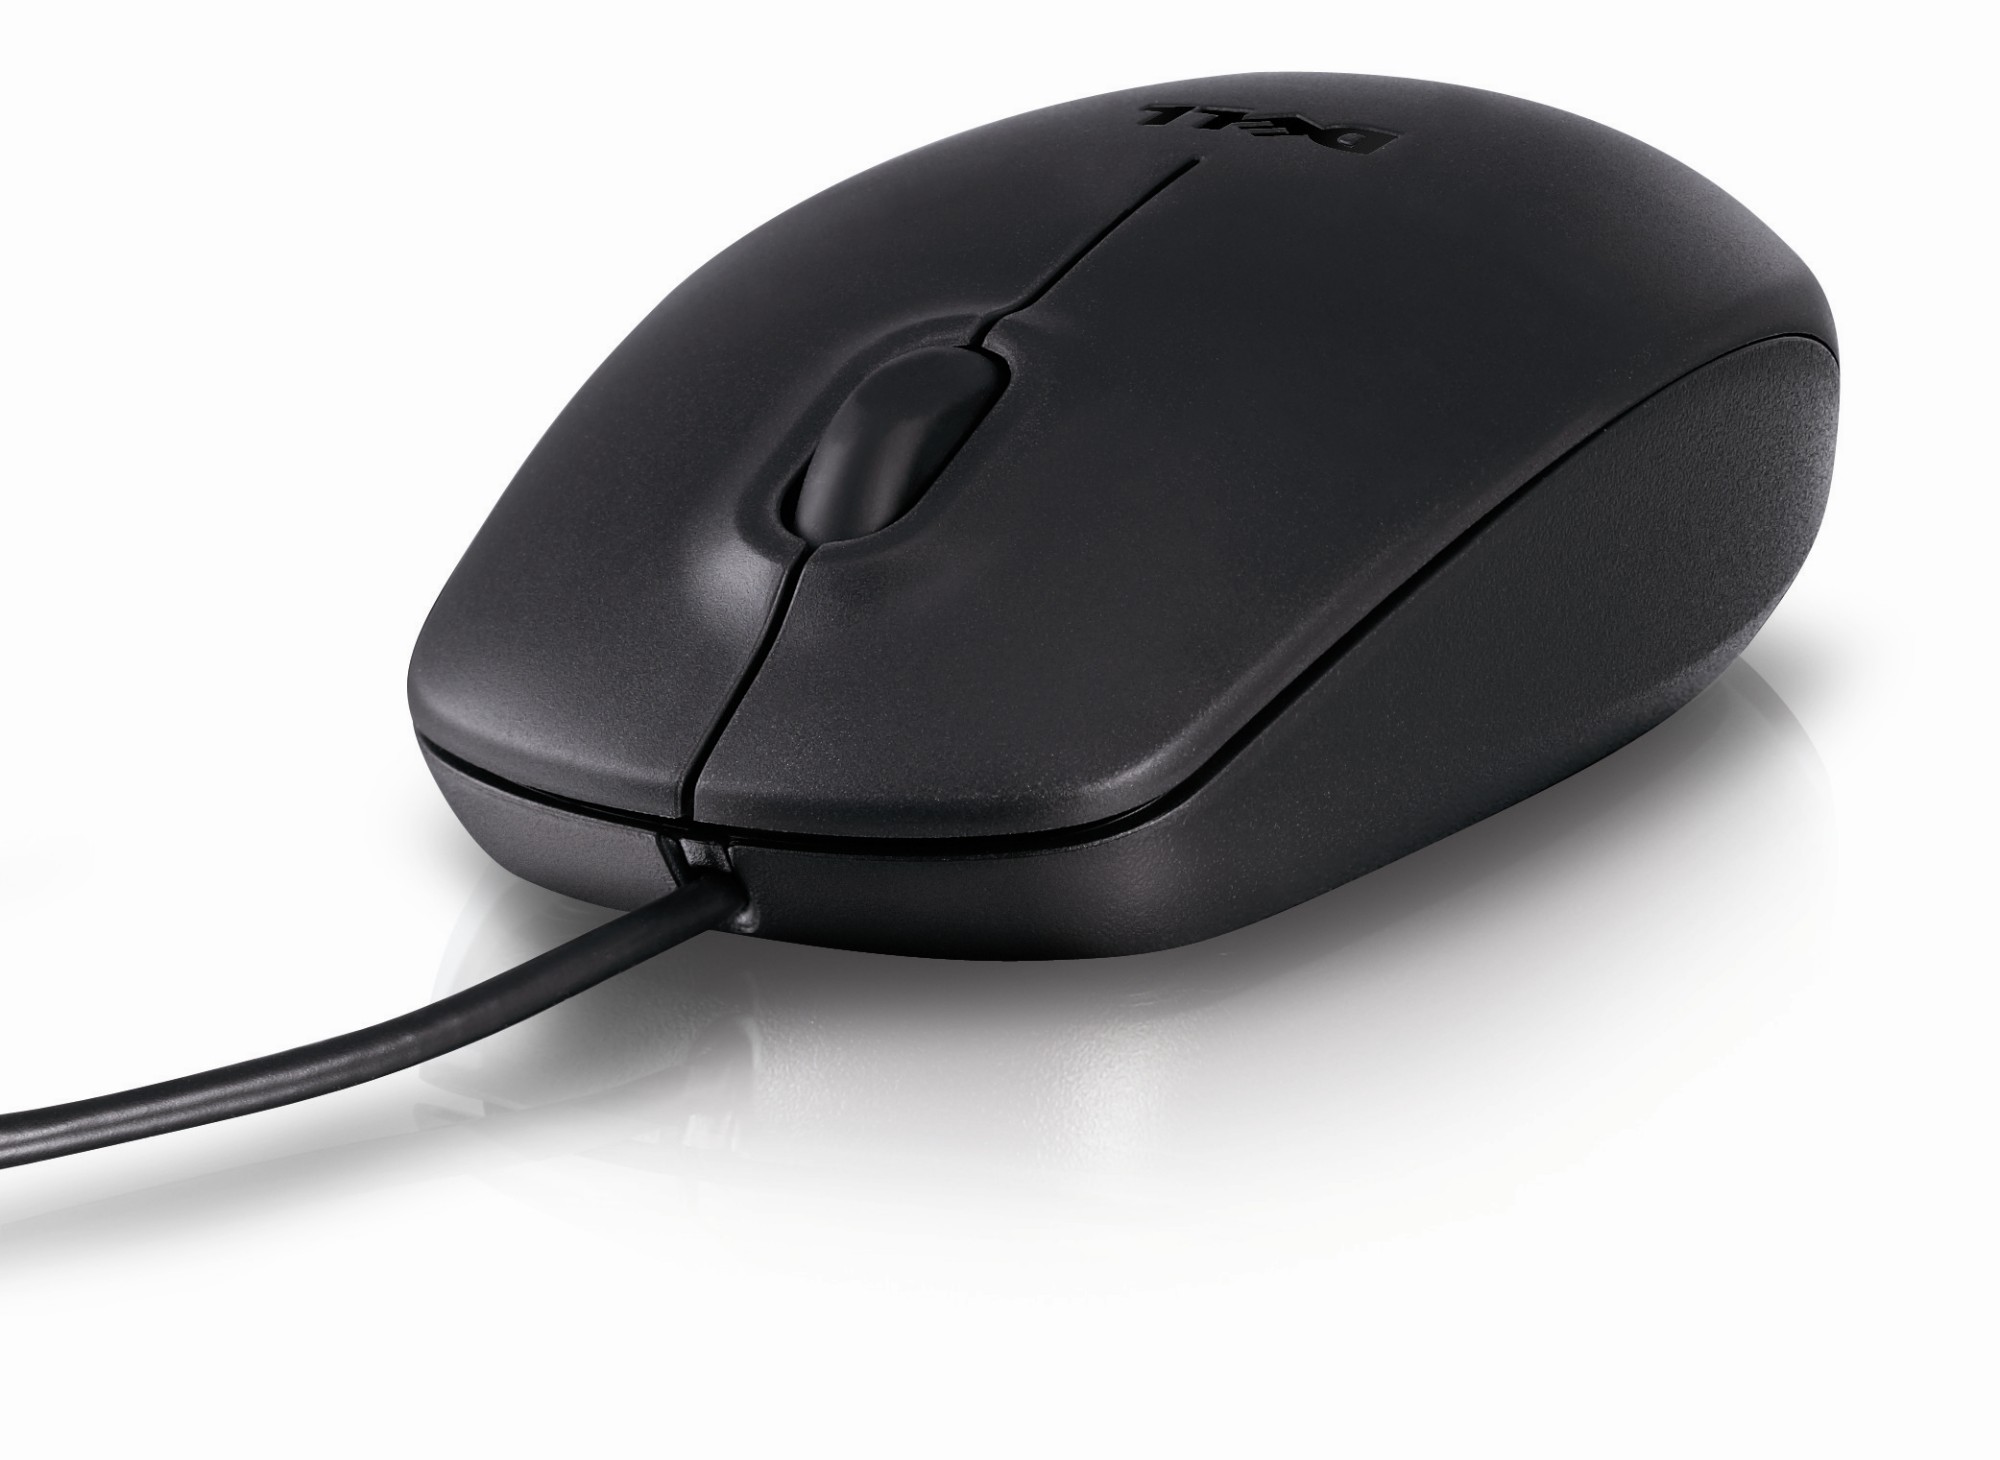 primax usb optical mouse driver